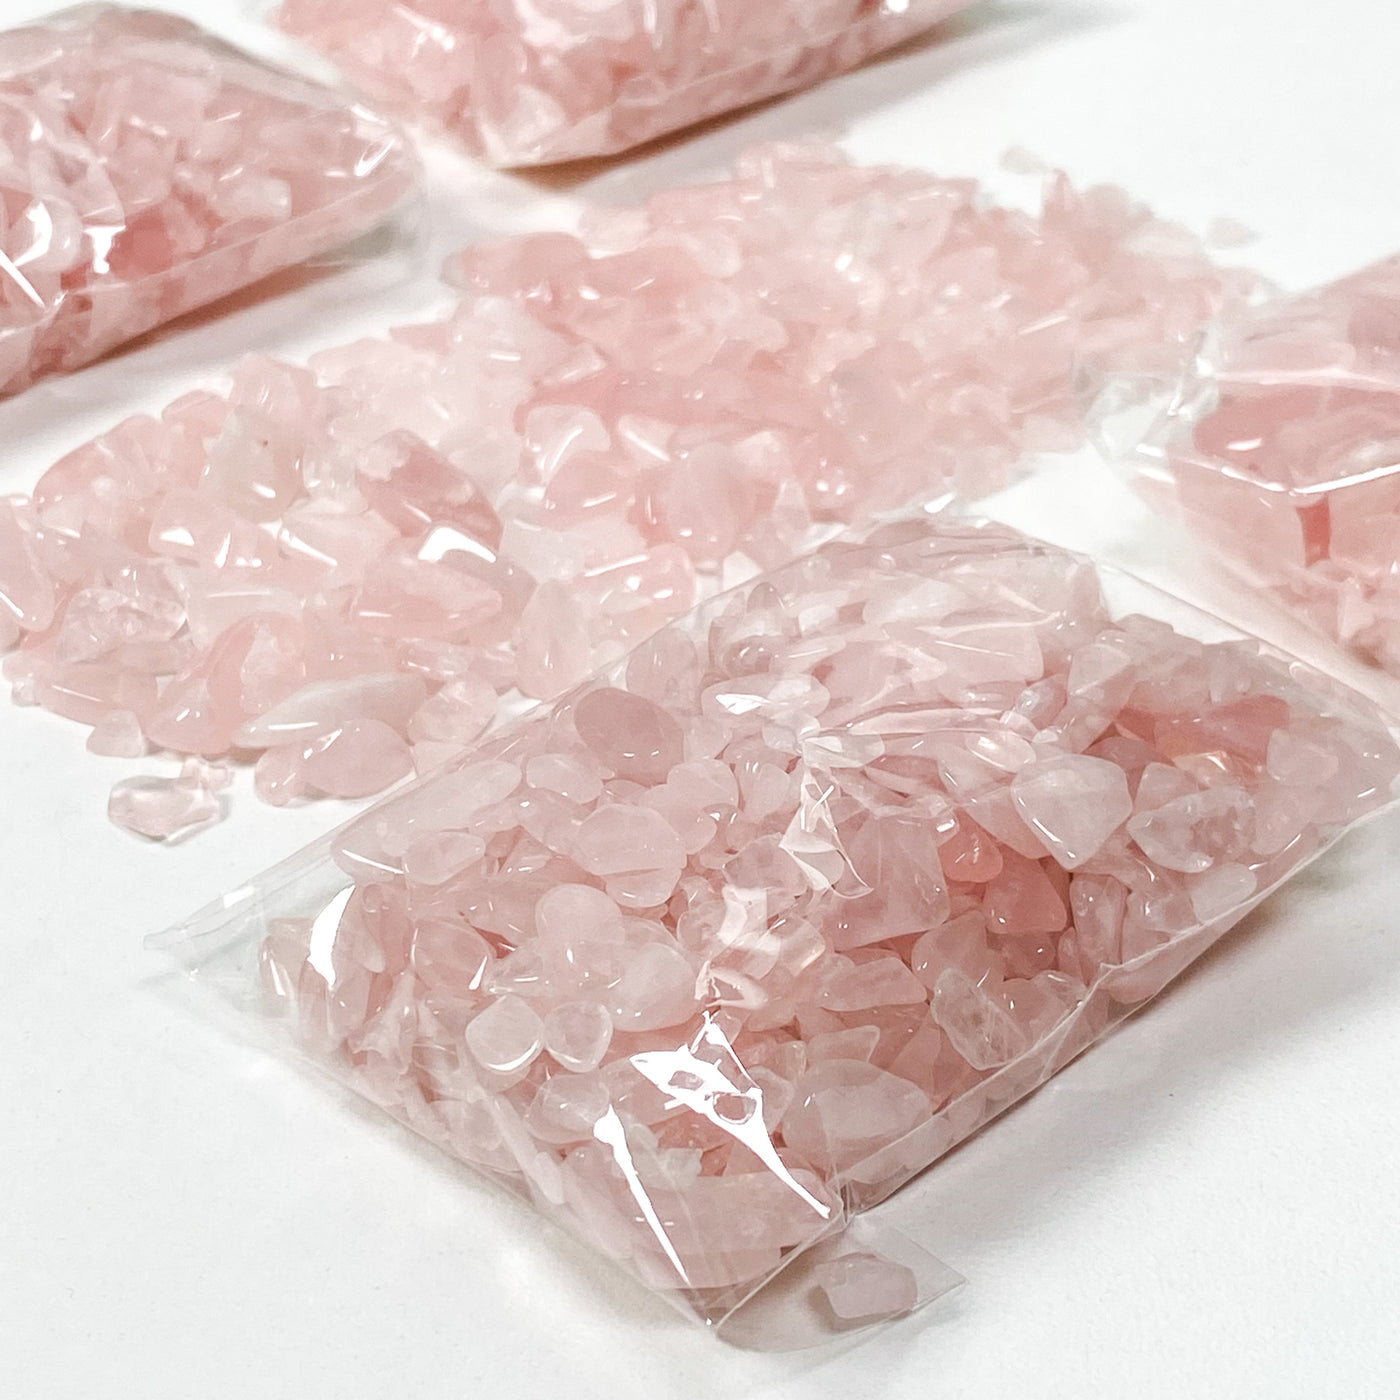 Rose Quartz chips in pouch